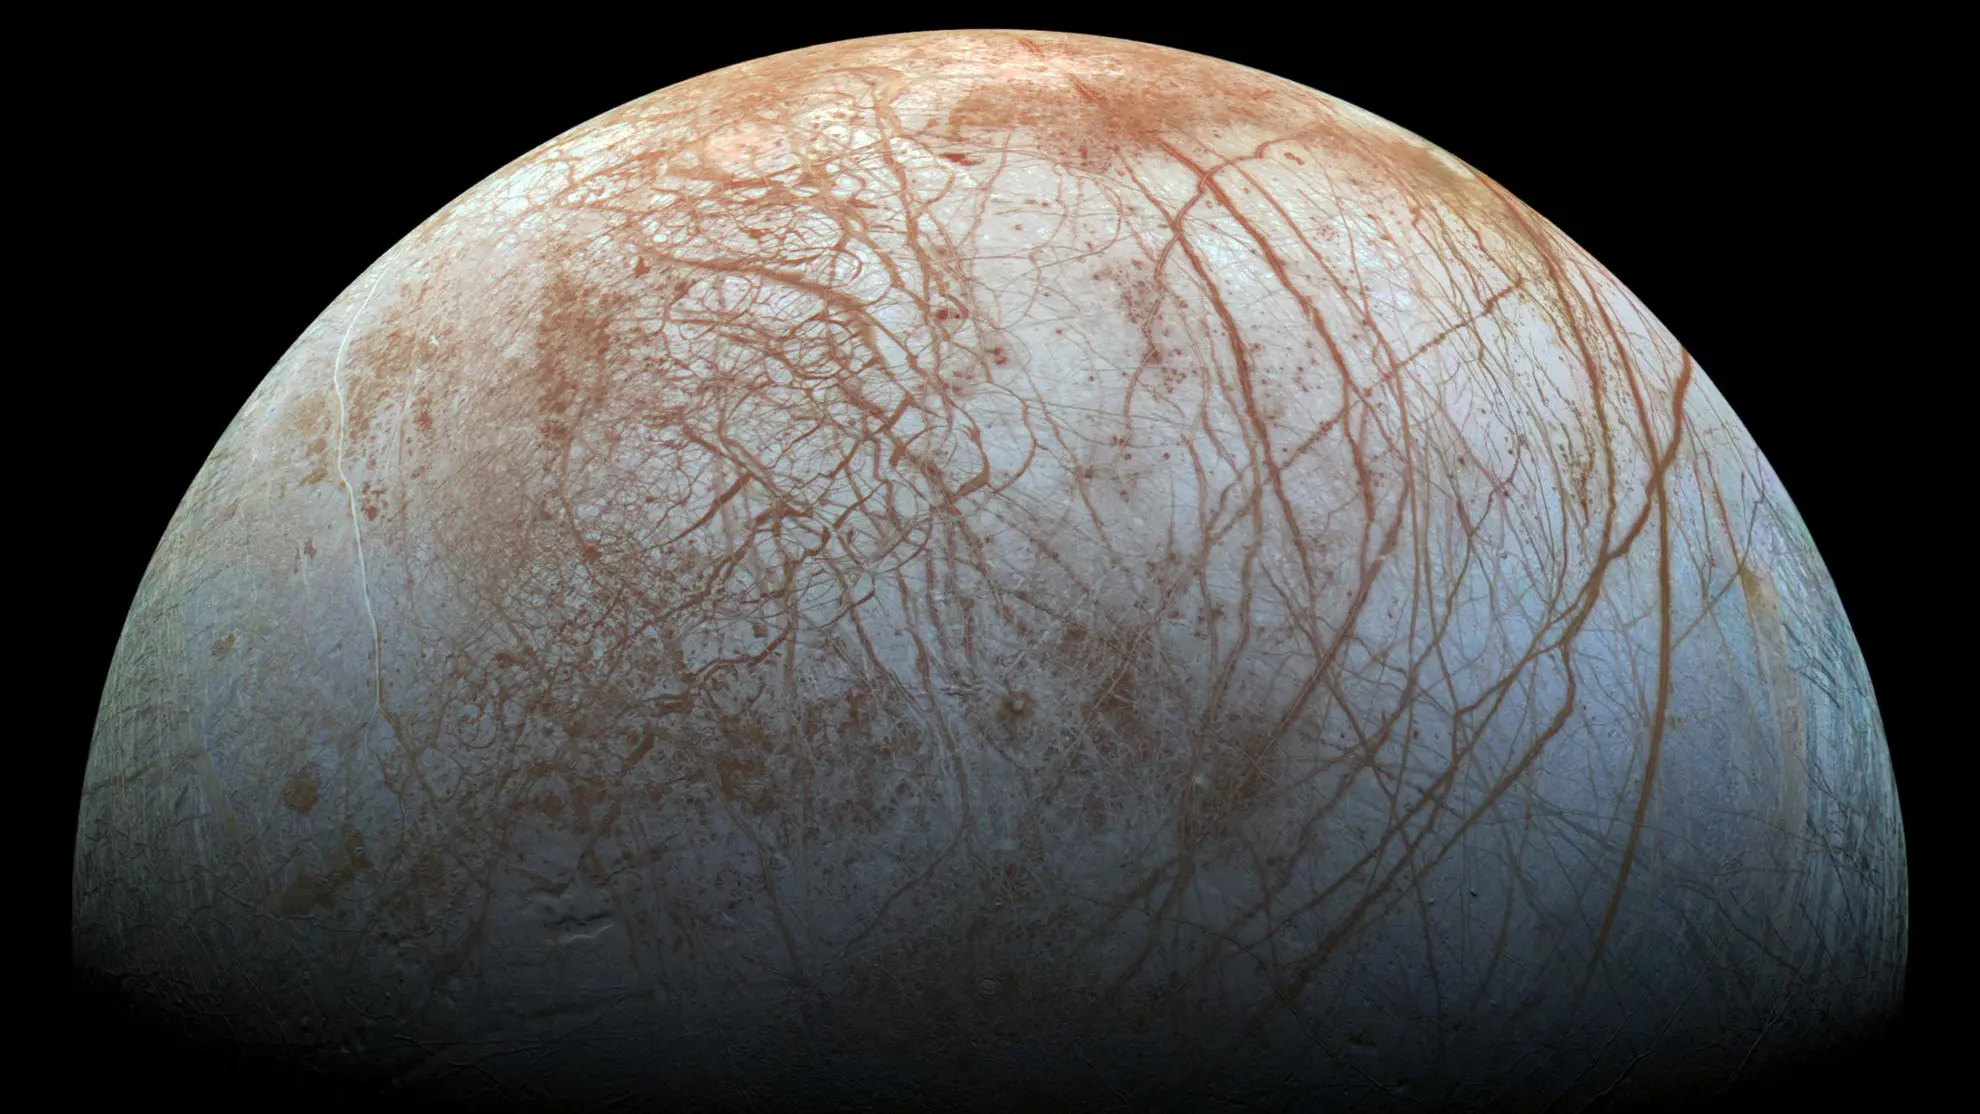 Europa's subsurface ocean may be more habitable than we thought